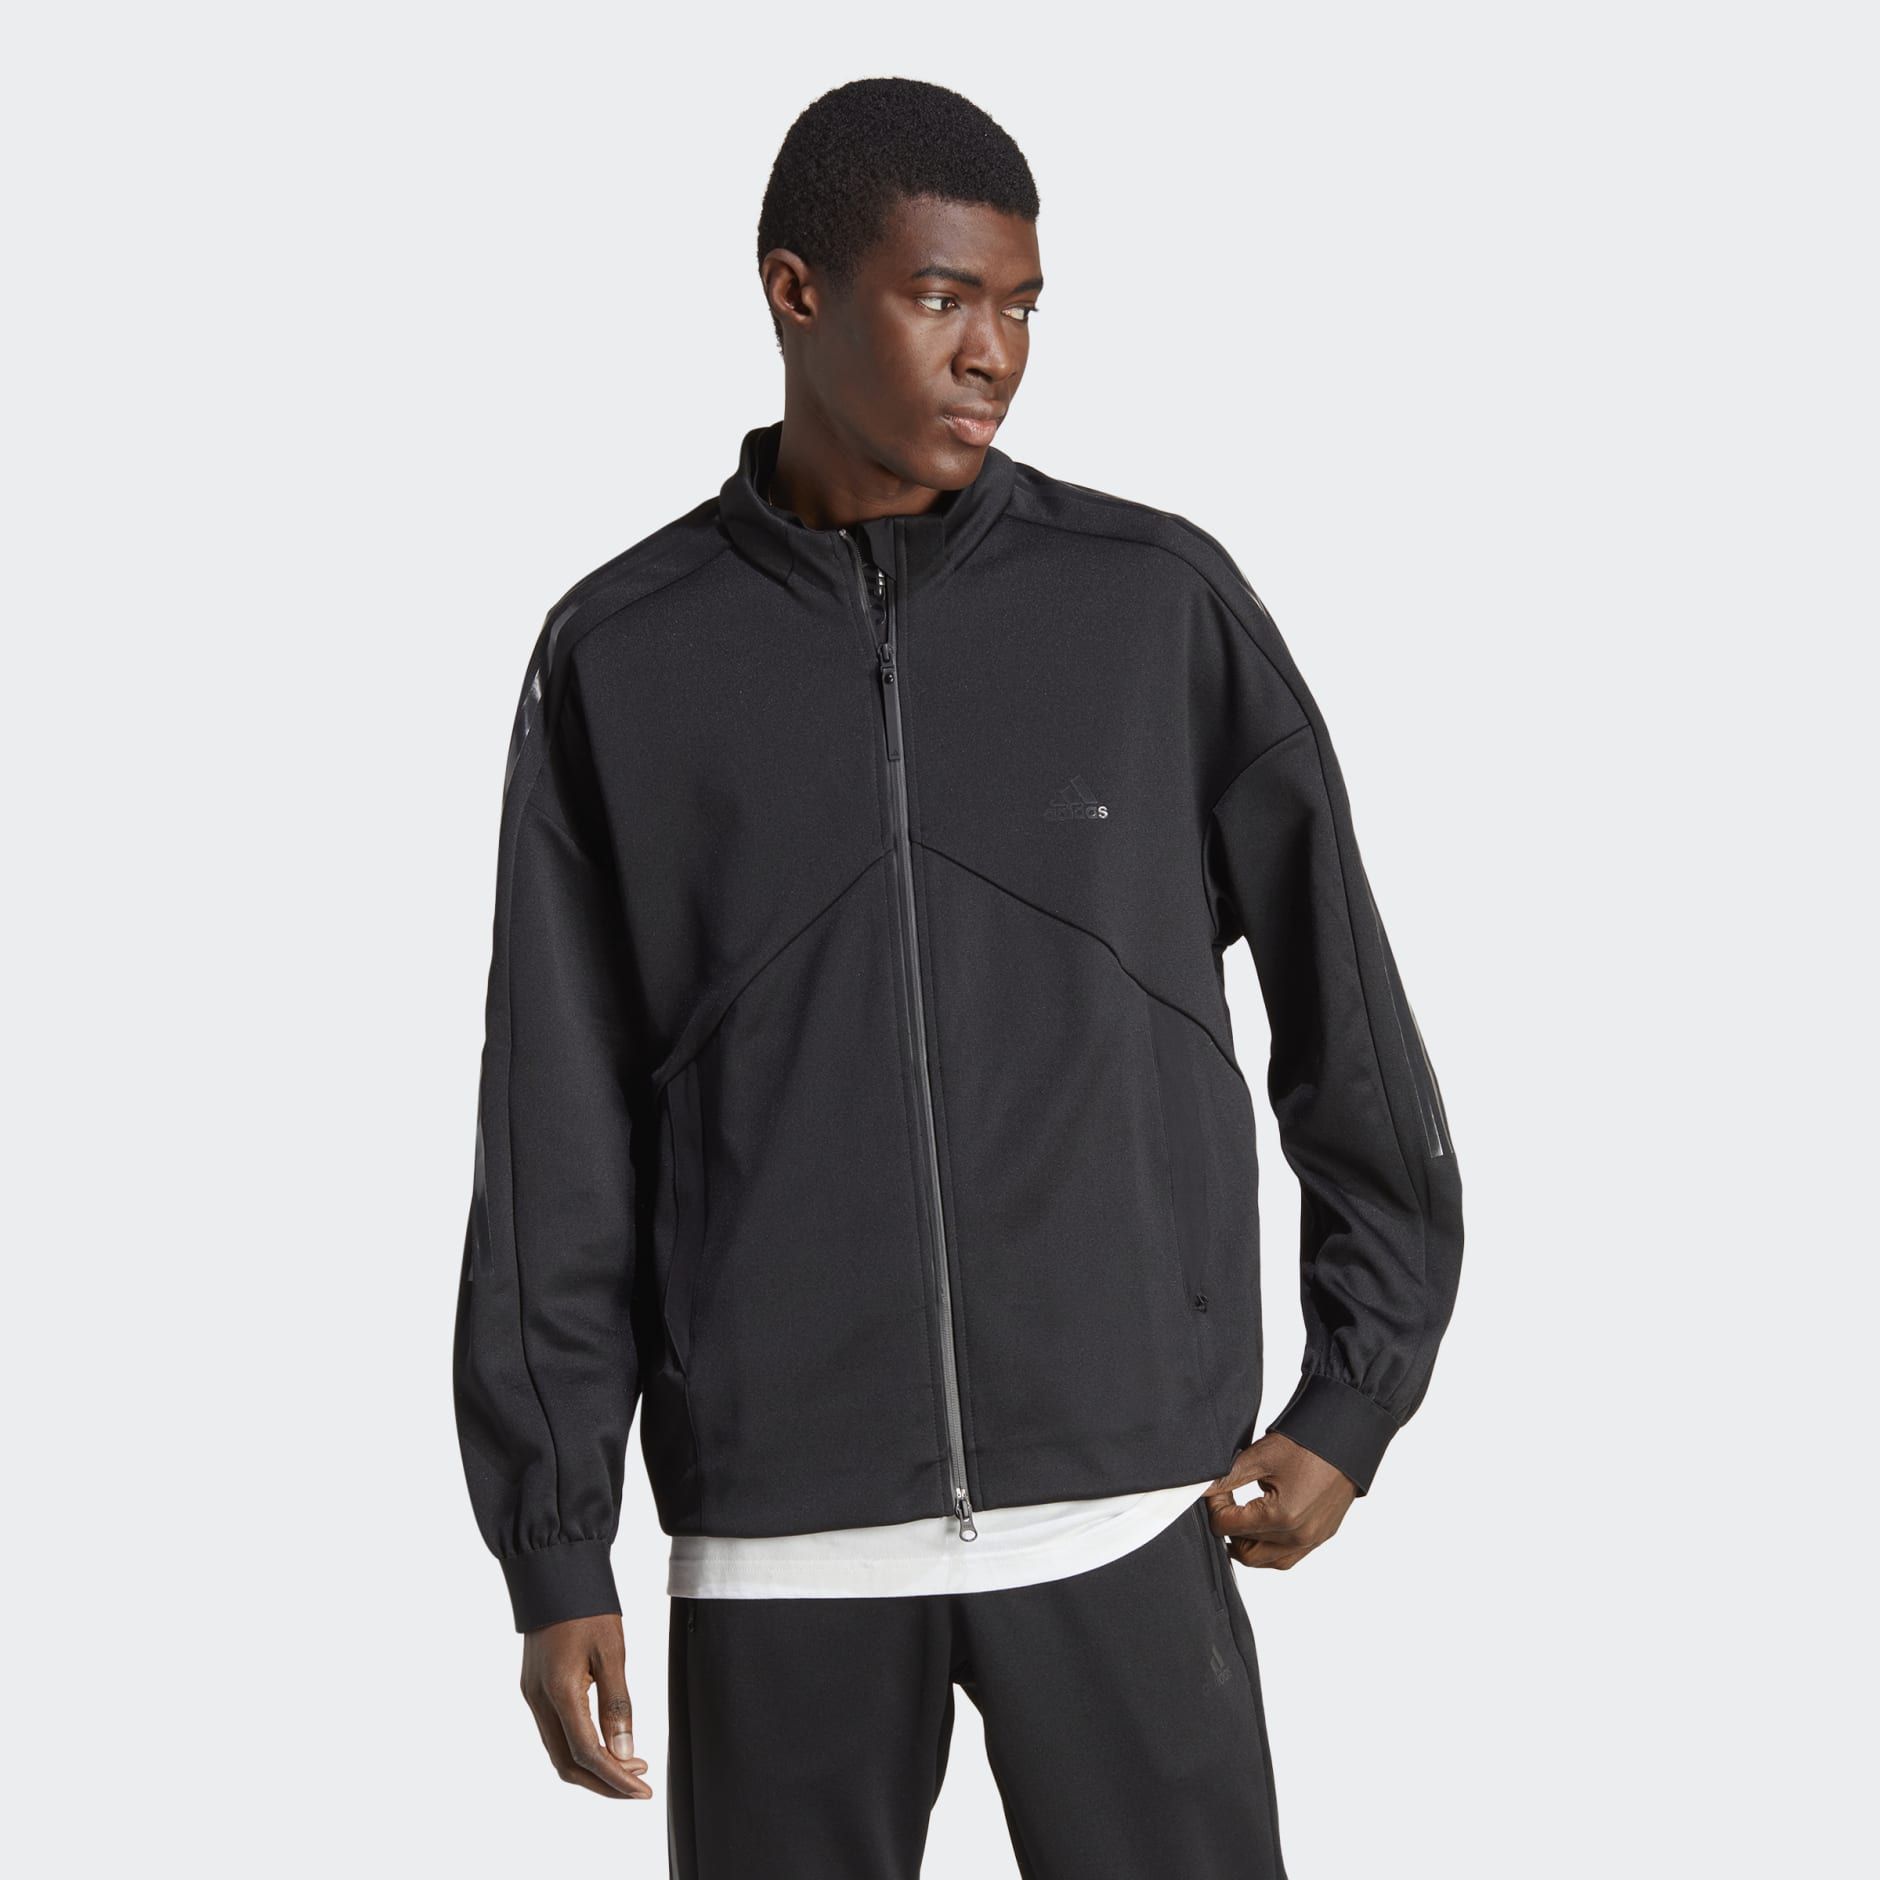 Clothing - Tiro Suit-Up Advanced Track Top - Black | adidas South Africa